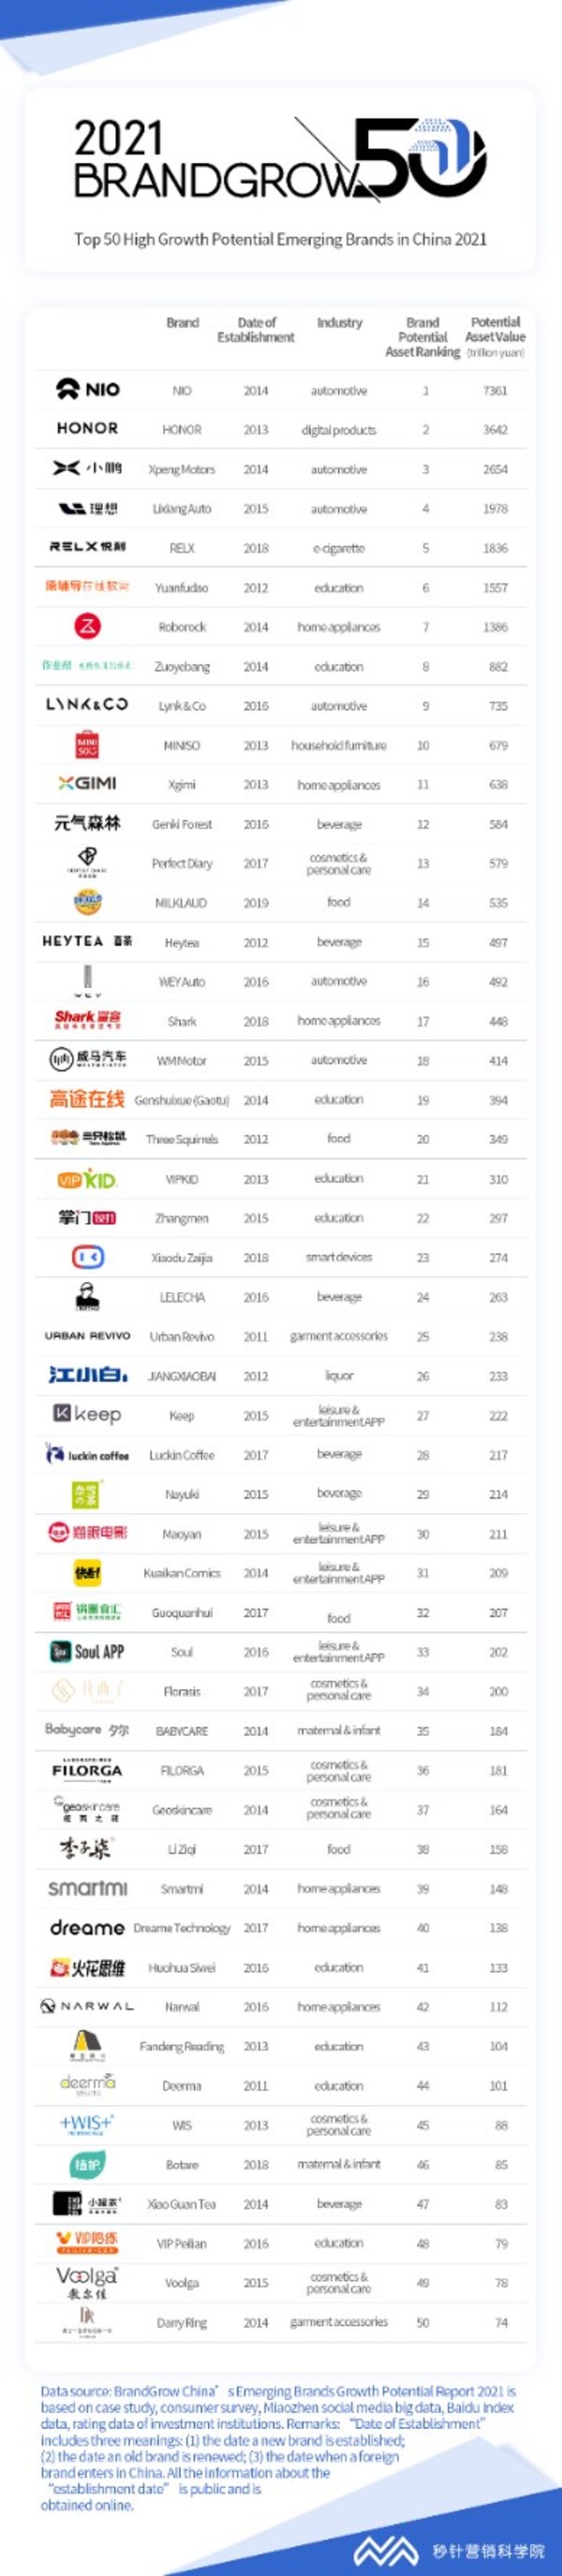 BrandGrow Top 50 high growth potential emerging brand in China 2021,Miaozhen academy of maketing science